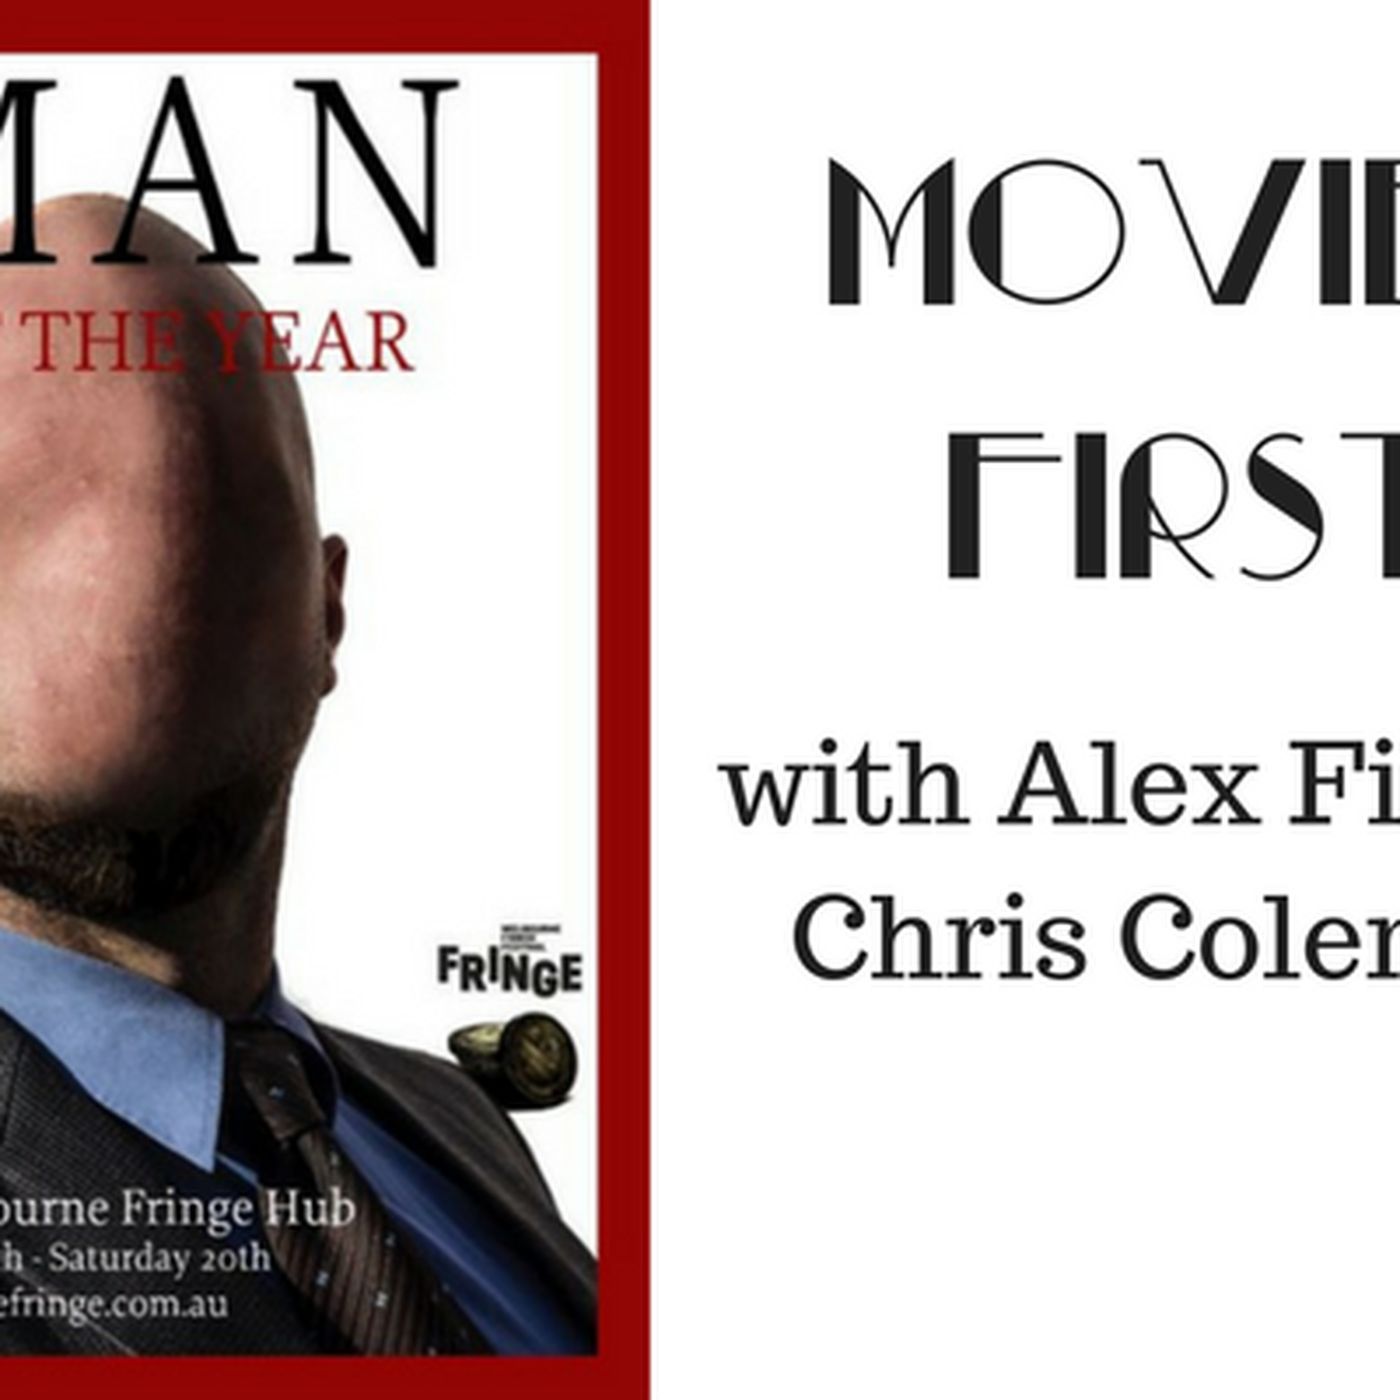 38: Movies First with Alex First & Chris Coleman - Live Theater - Man Of The Year